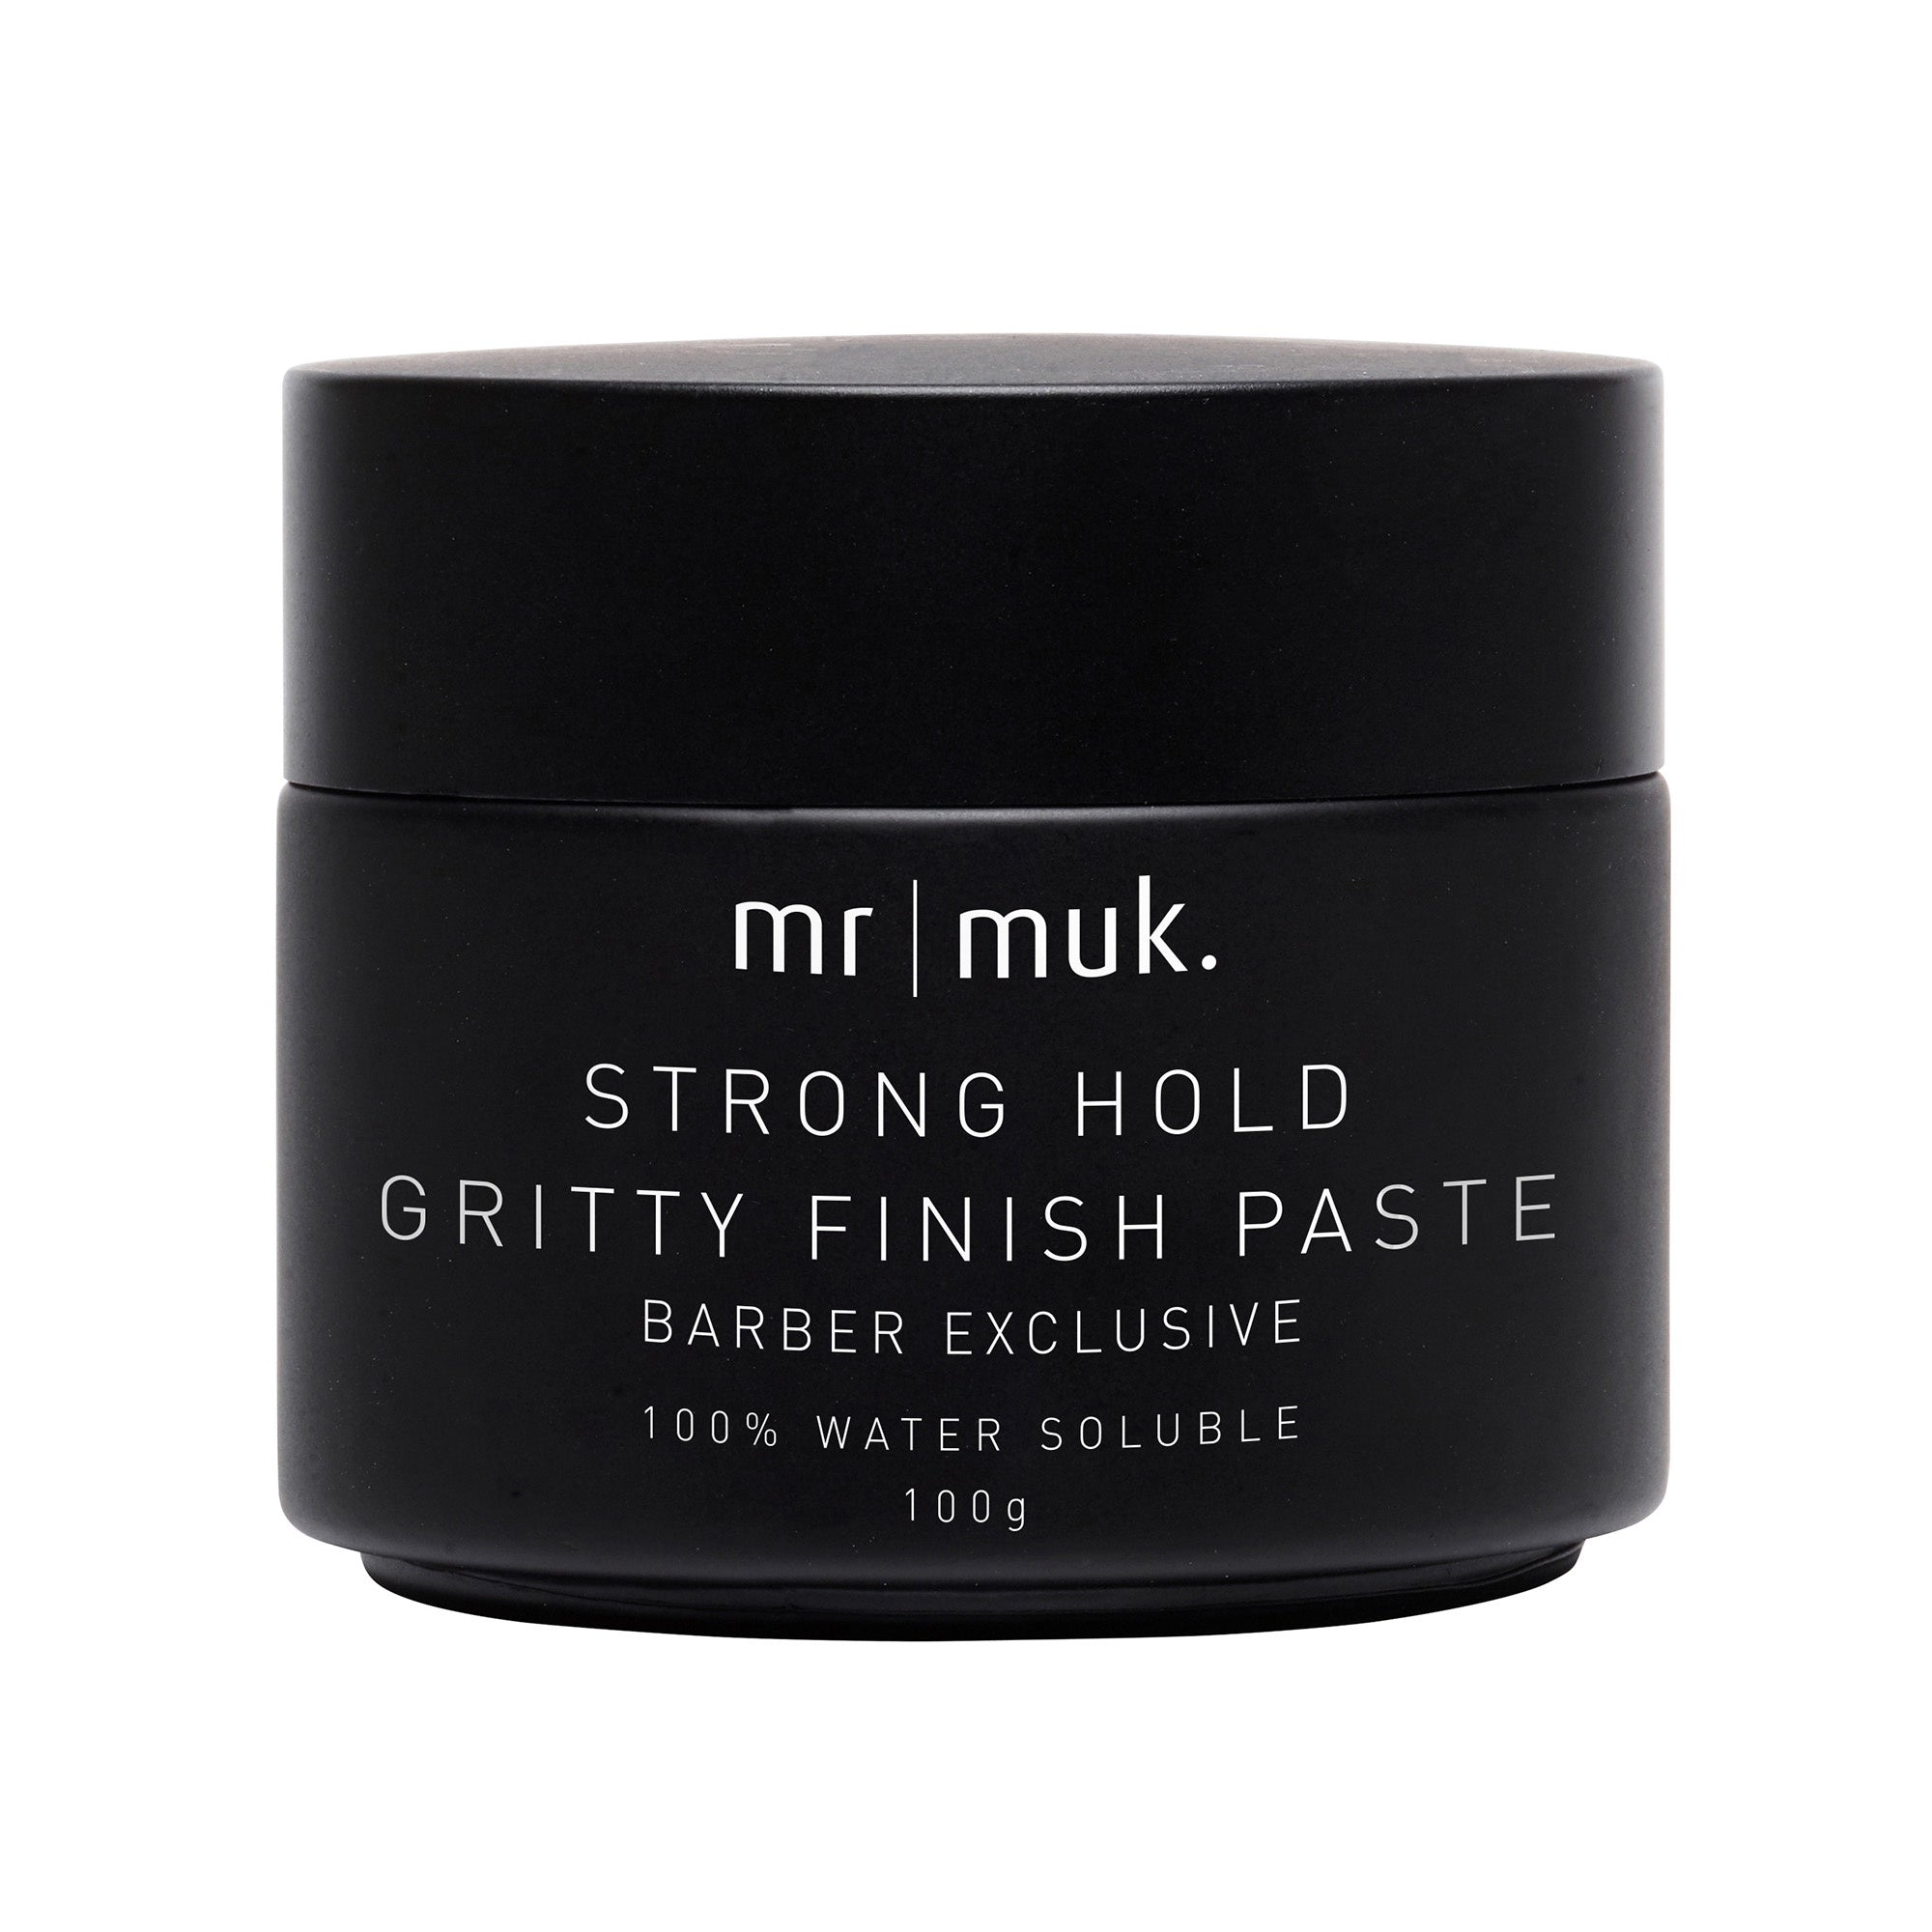 Mr Muk Strong Hold Gritty Finish Paste is a strong hold finishing paste with grit galore ideal for creating and reworking roughed up styles without any flaking. 